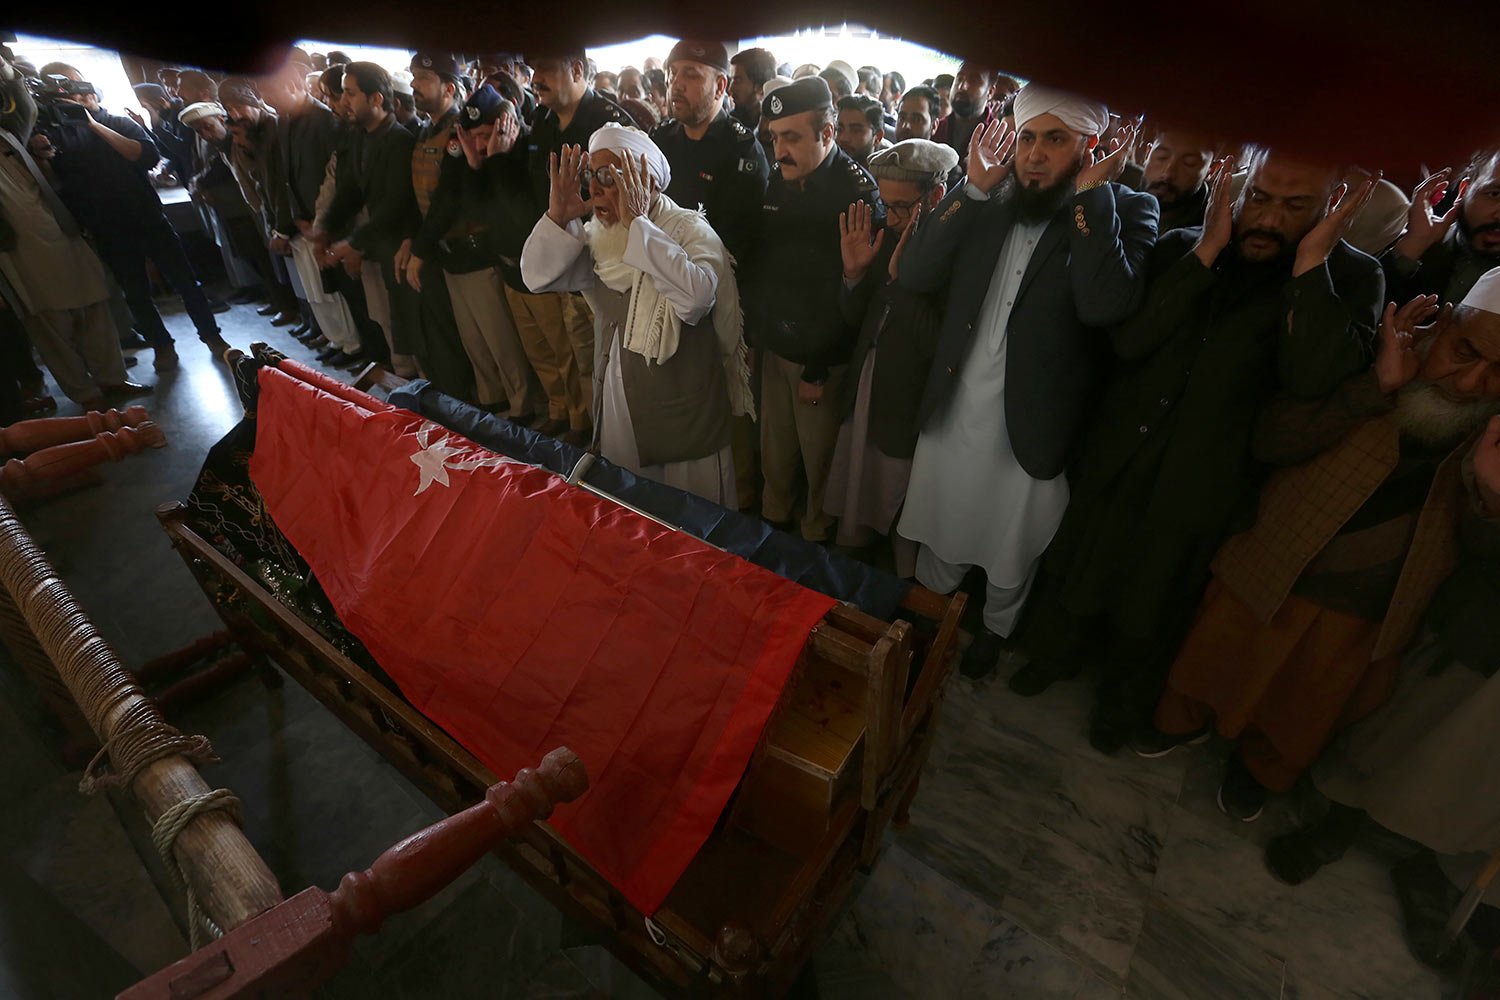  People attend the funeral prayer for a police officer killed in Monday's suicide bombing inside a mosque in Peshawar, Pakistan, Tuesday, Jan. 31, 2023. (AP Photo/Muhammad Sajjad) 